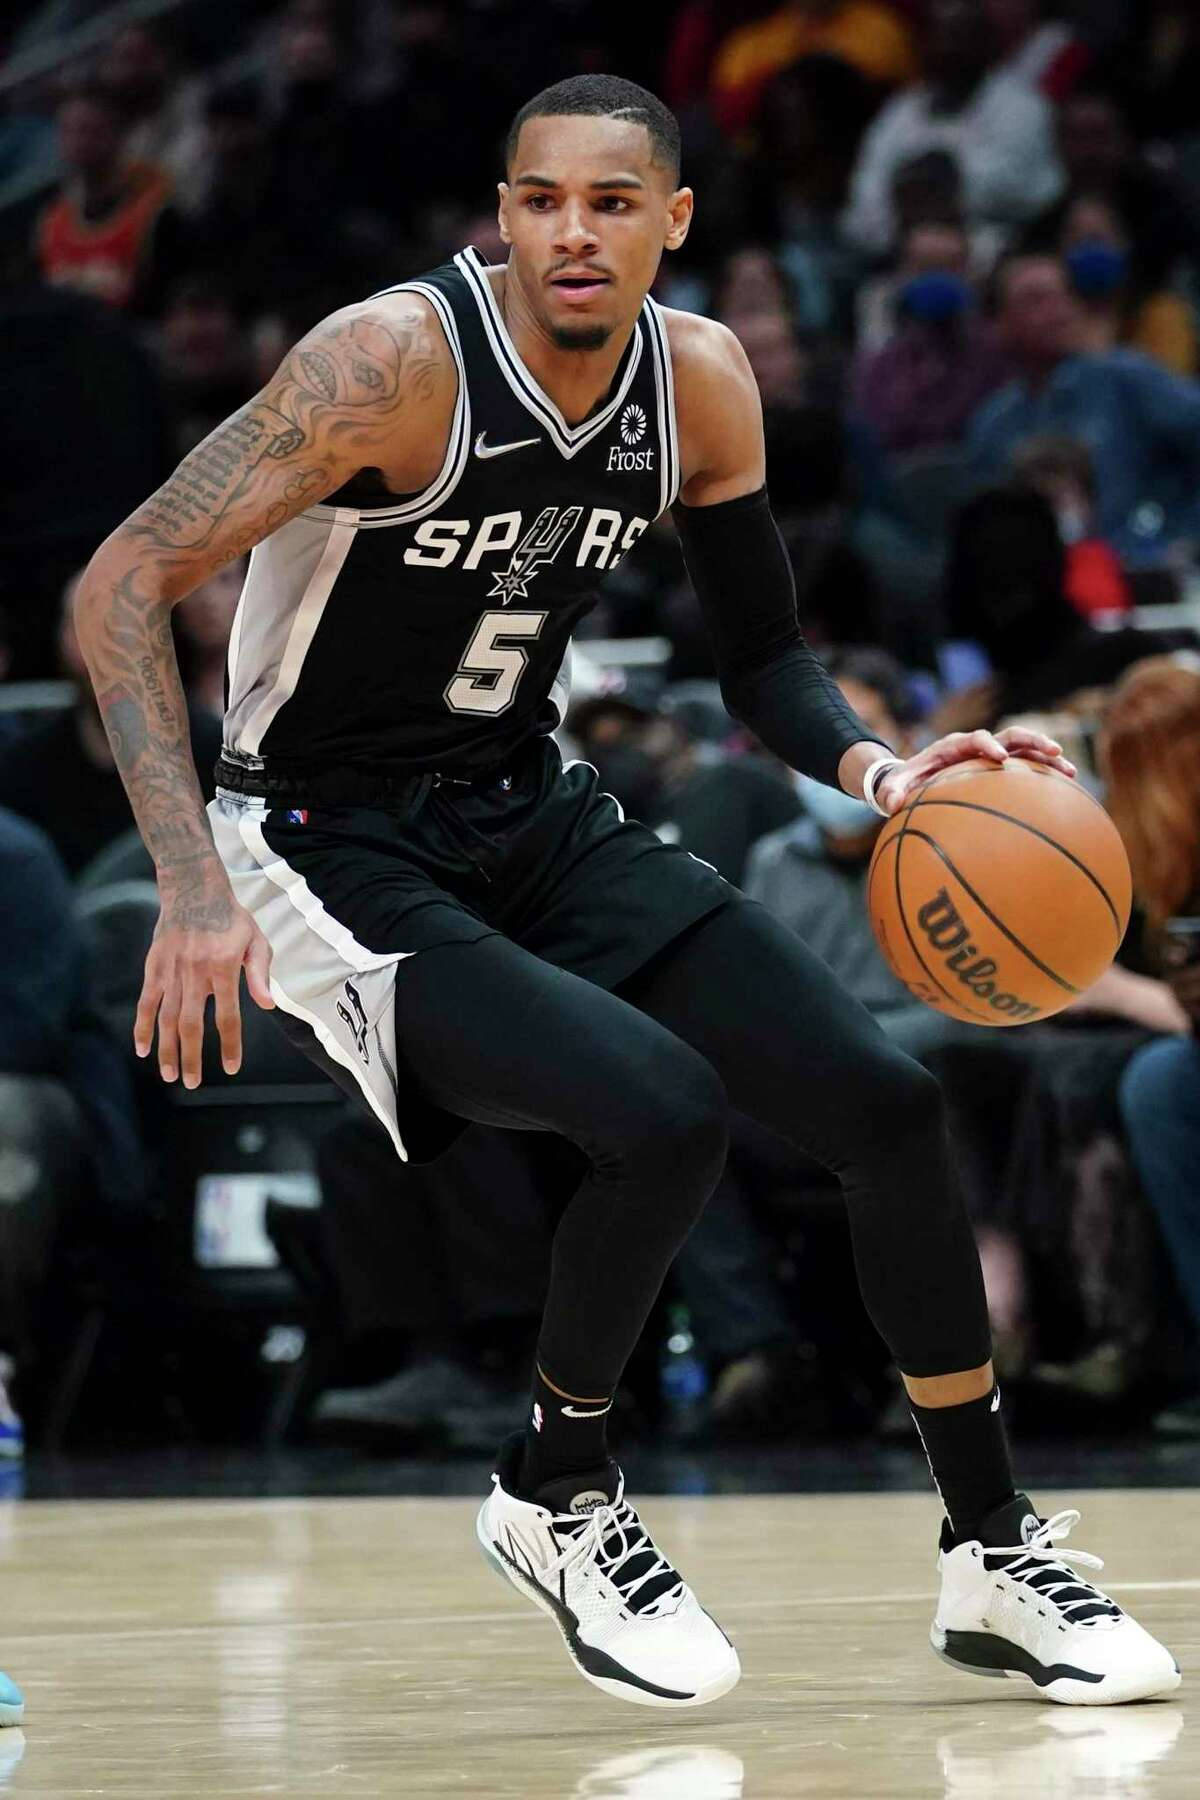 Top 999+ Dejounte Murray Wallpaper Full HD, 4K Free to Use